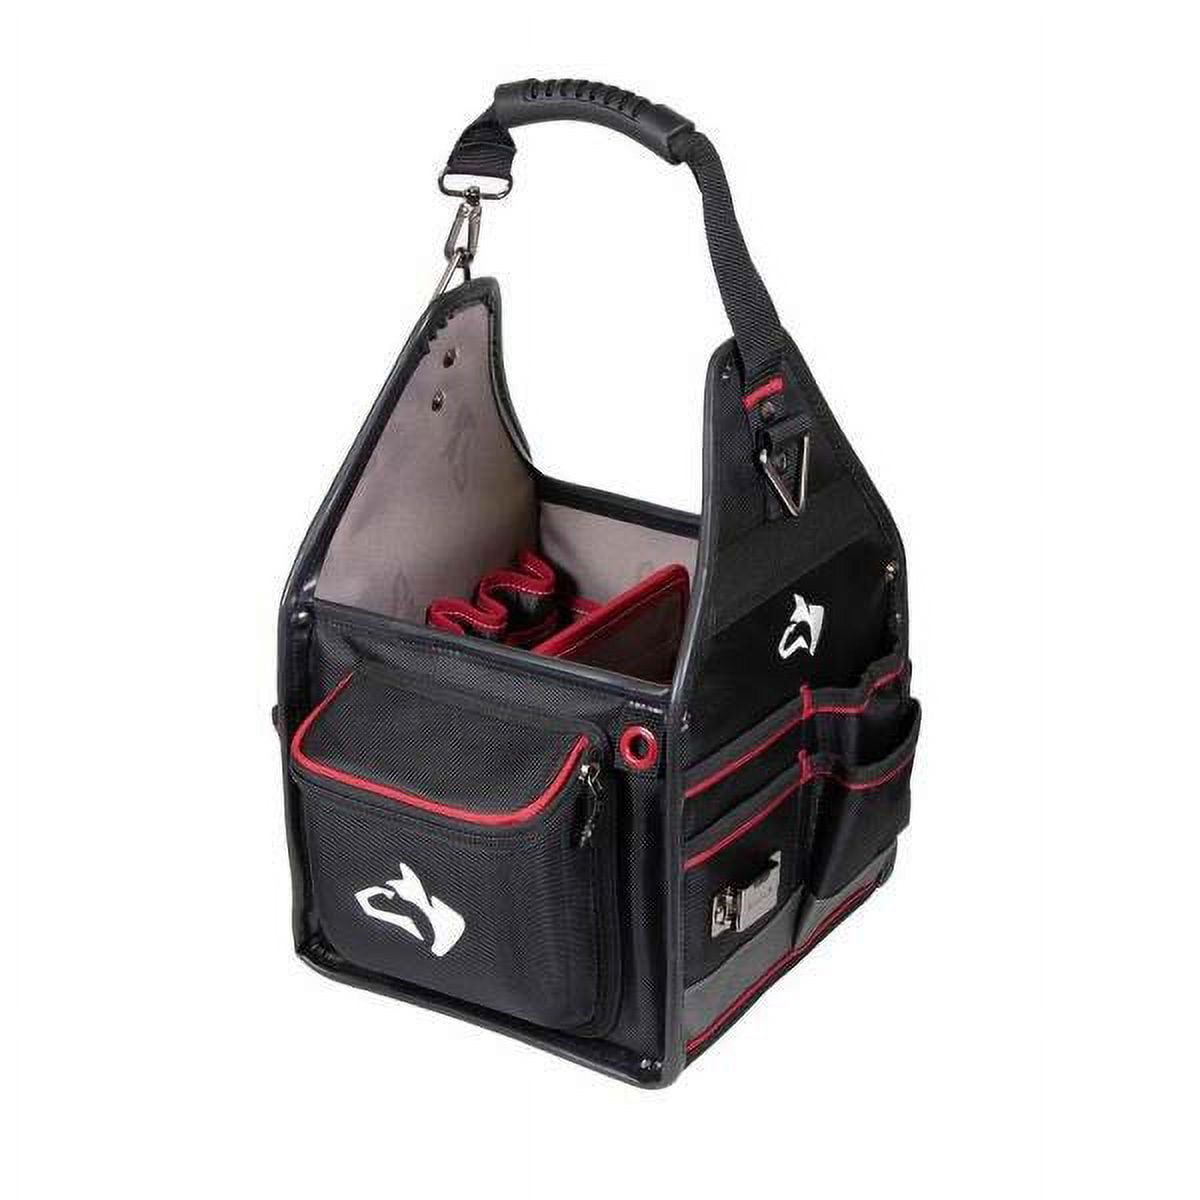 Husky Tool Bag Review - Tools In Action - Power Tool Reviews